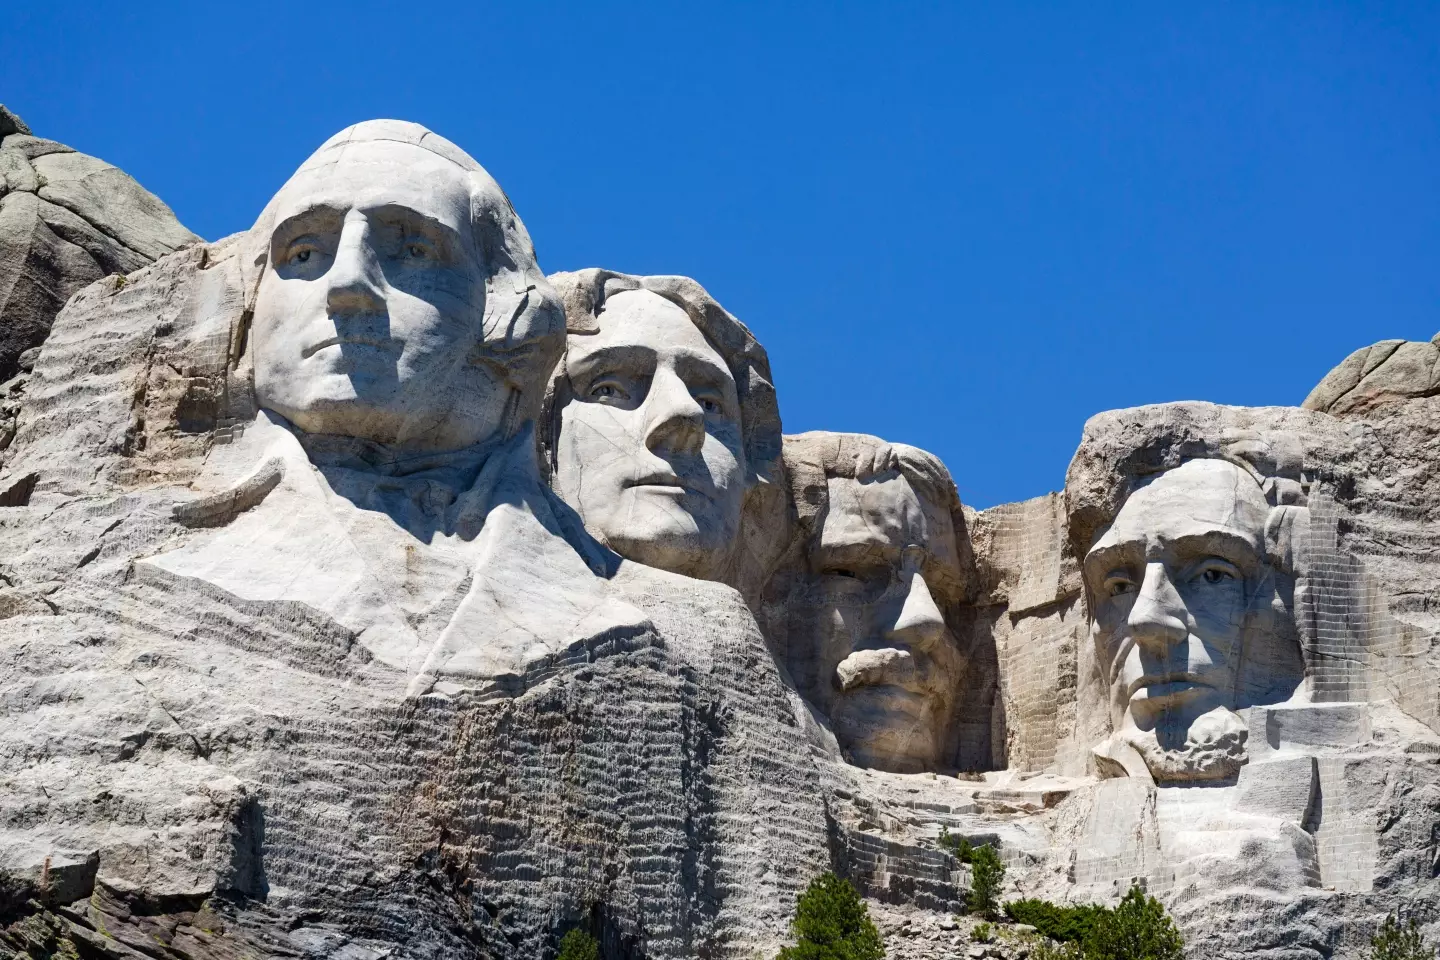 Did you know about the secret chamber behind Mount Rushmore.